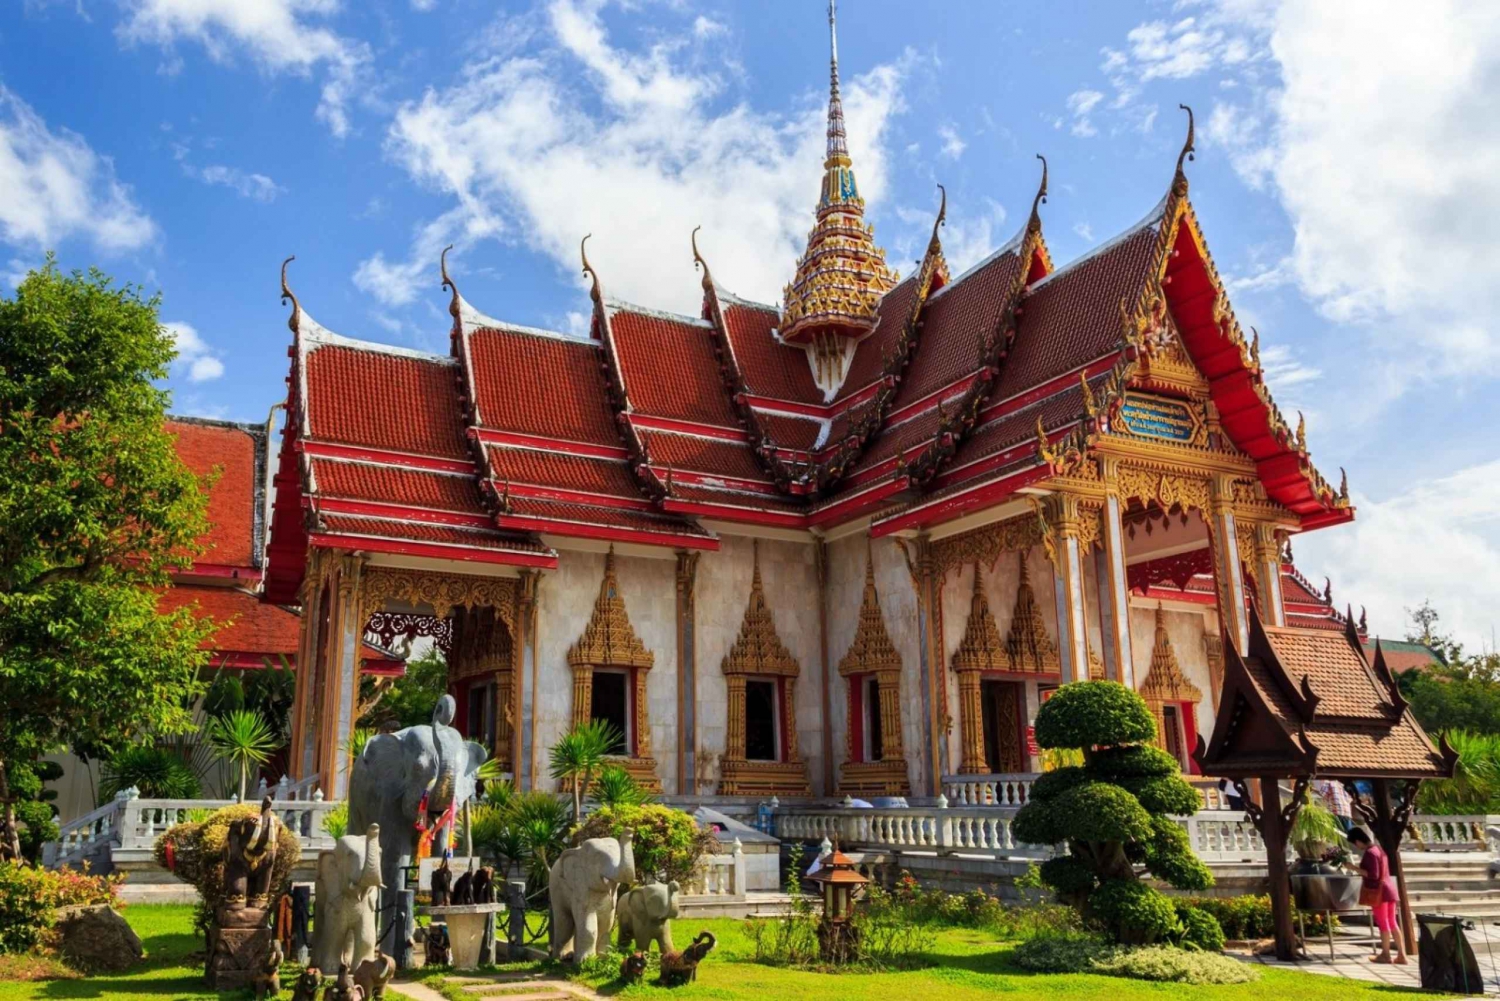 Phuket: Old Town, Chalong Temple, and Great Buddha Van Tour